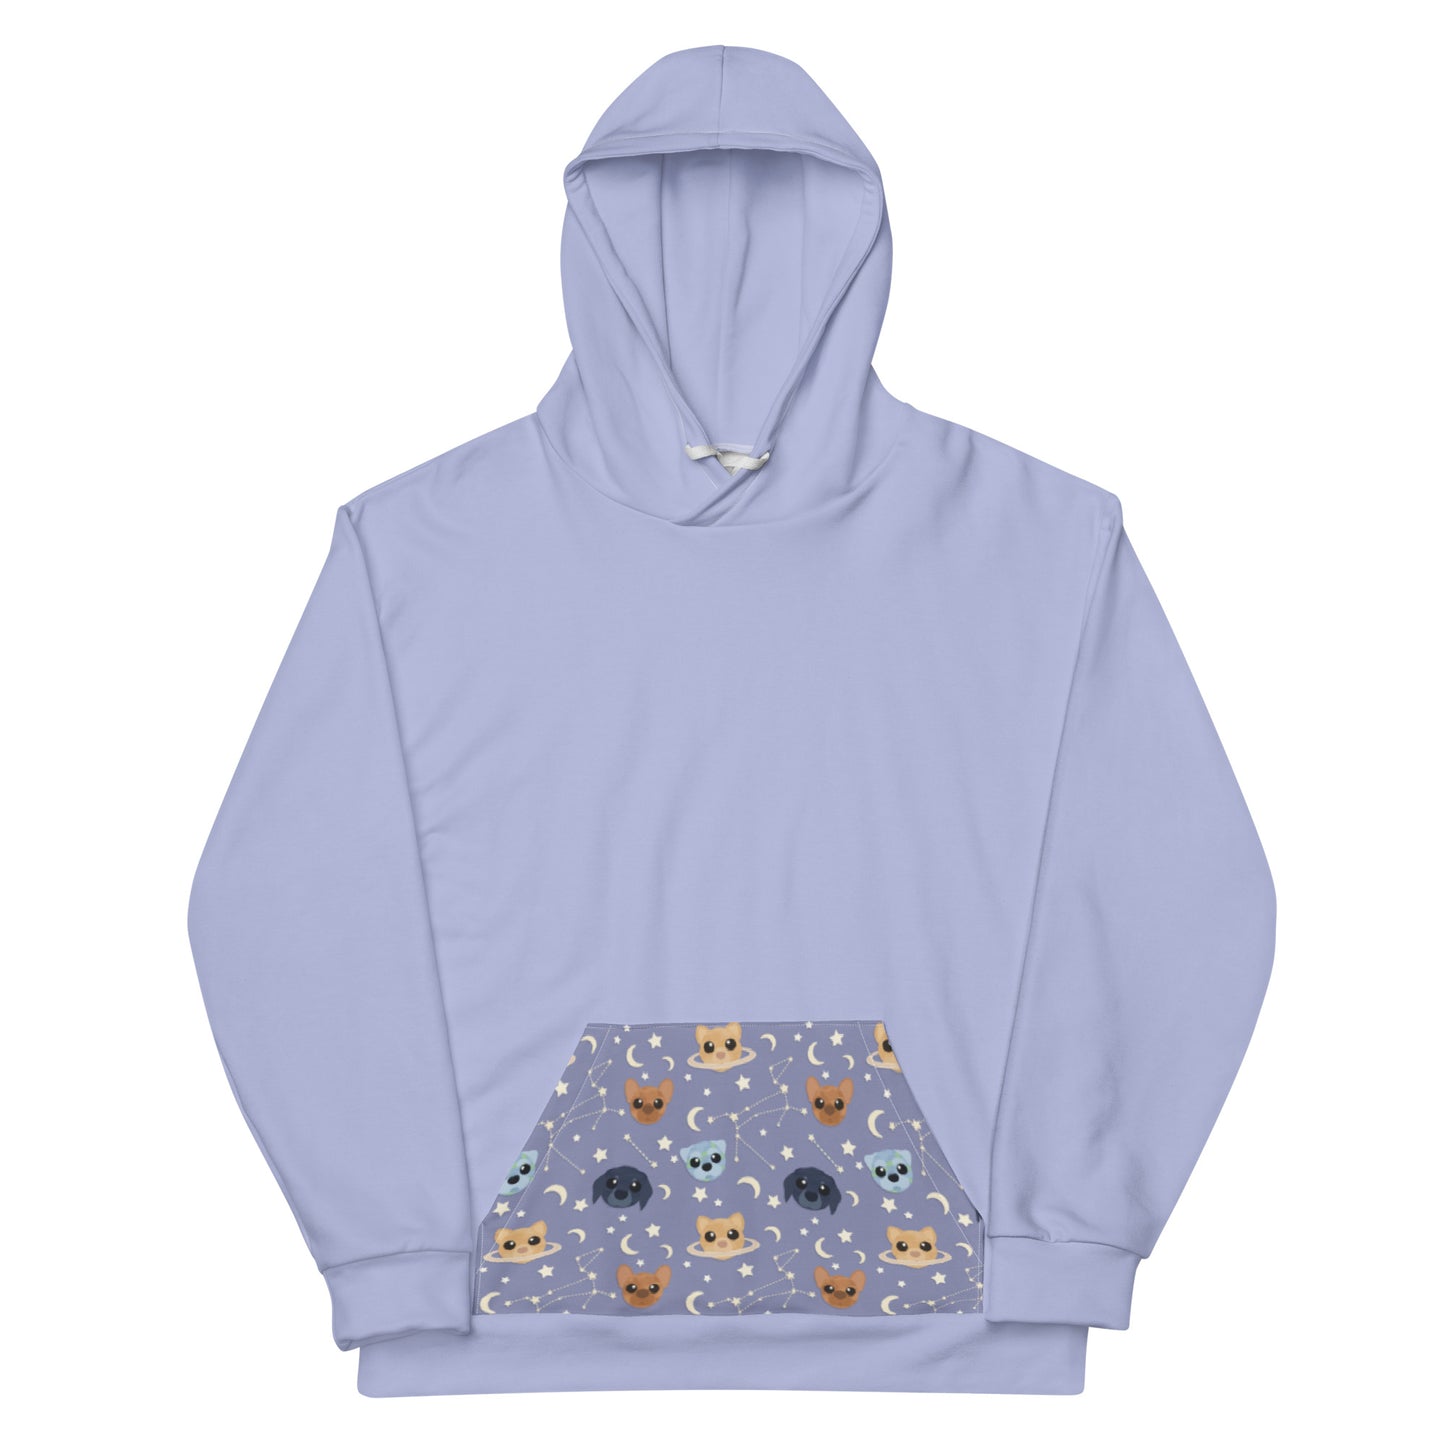 Astro-Mutts Unisex Pullover Hoodie